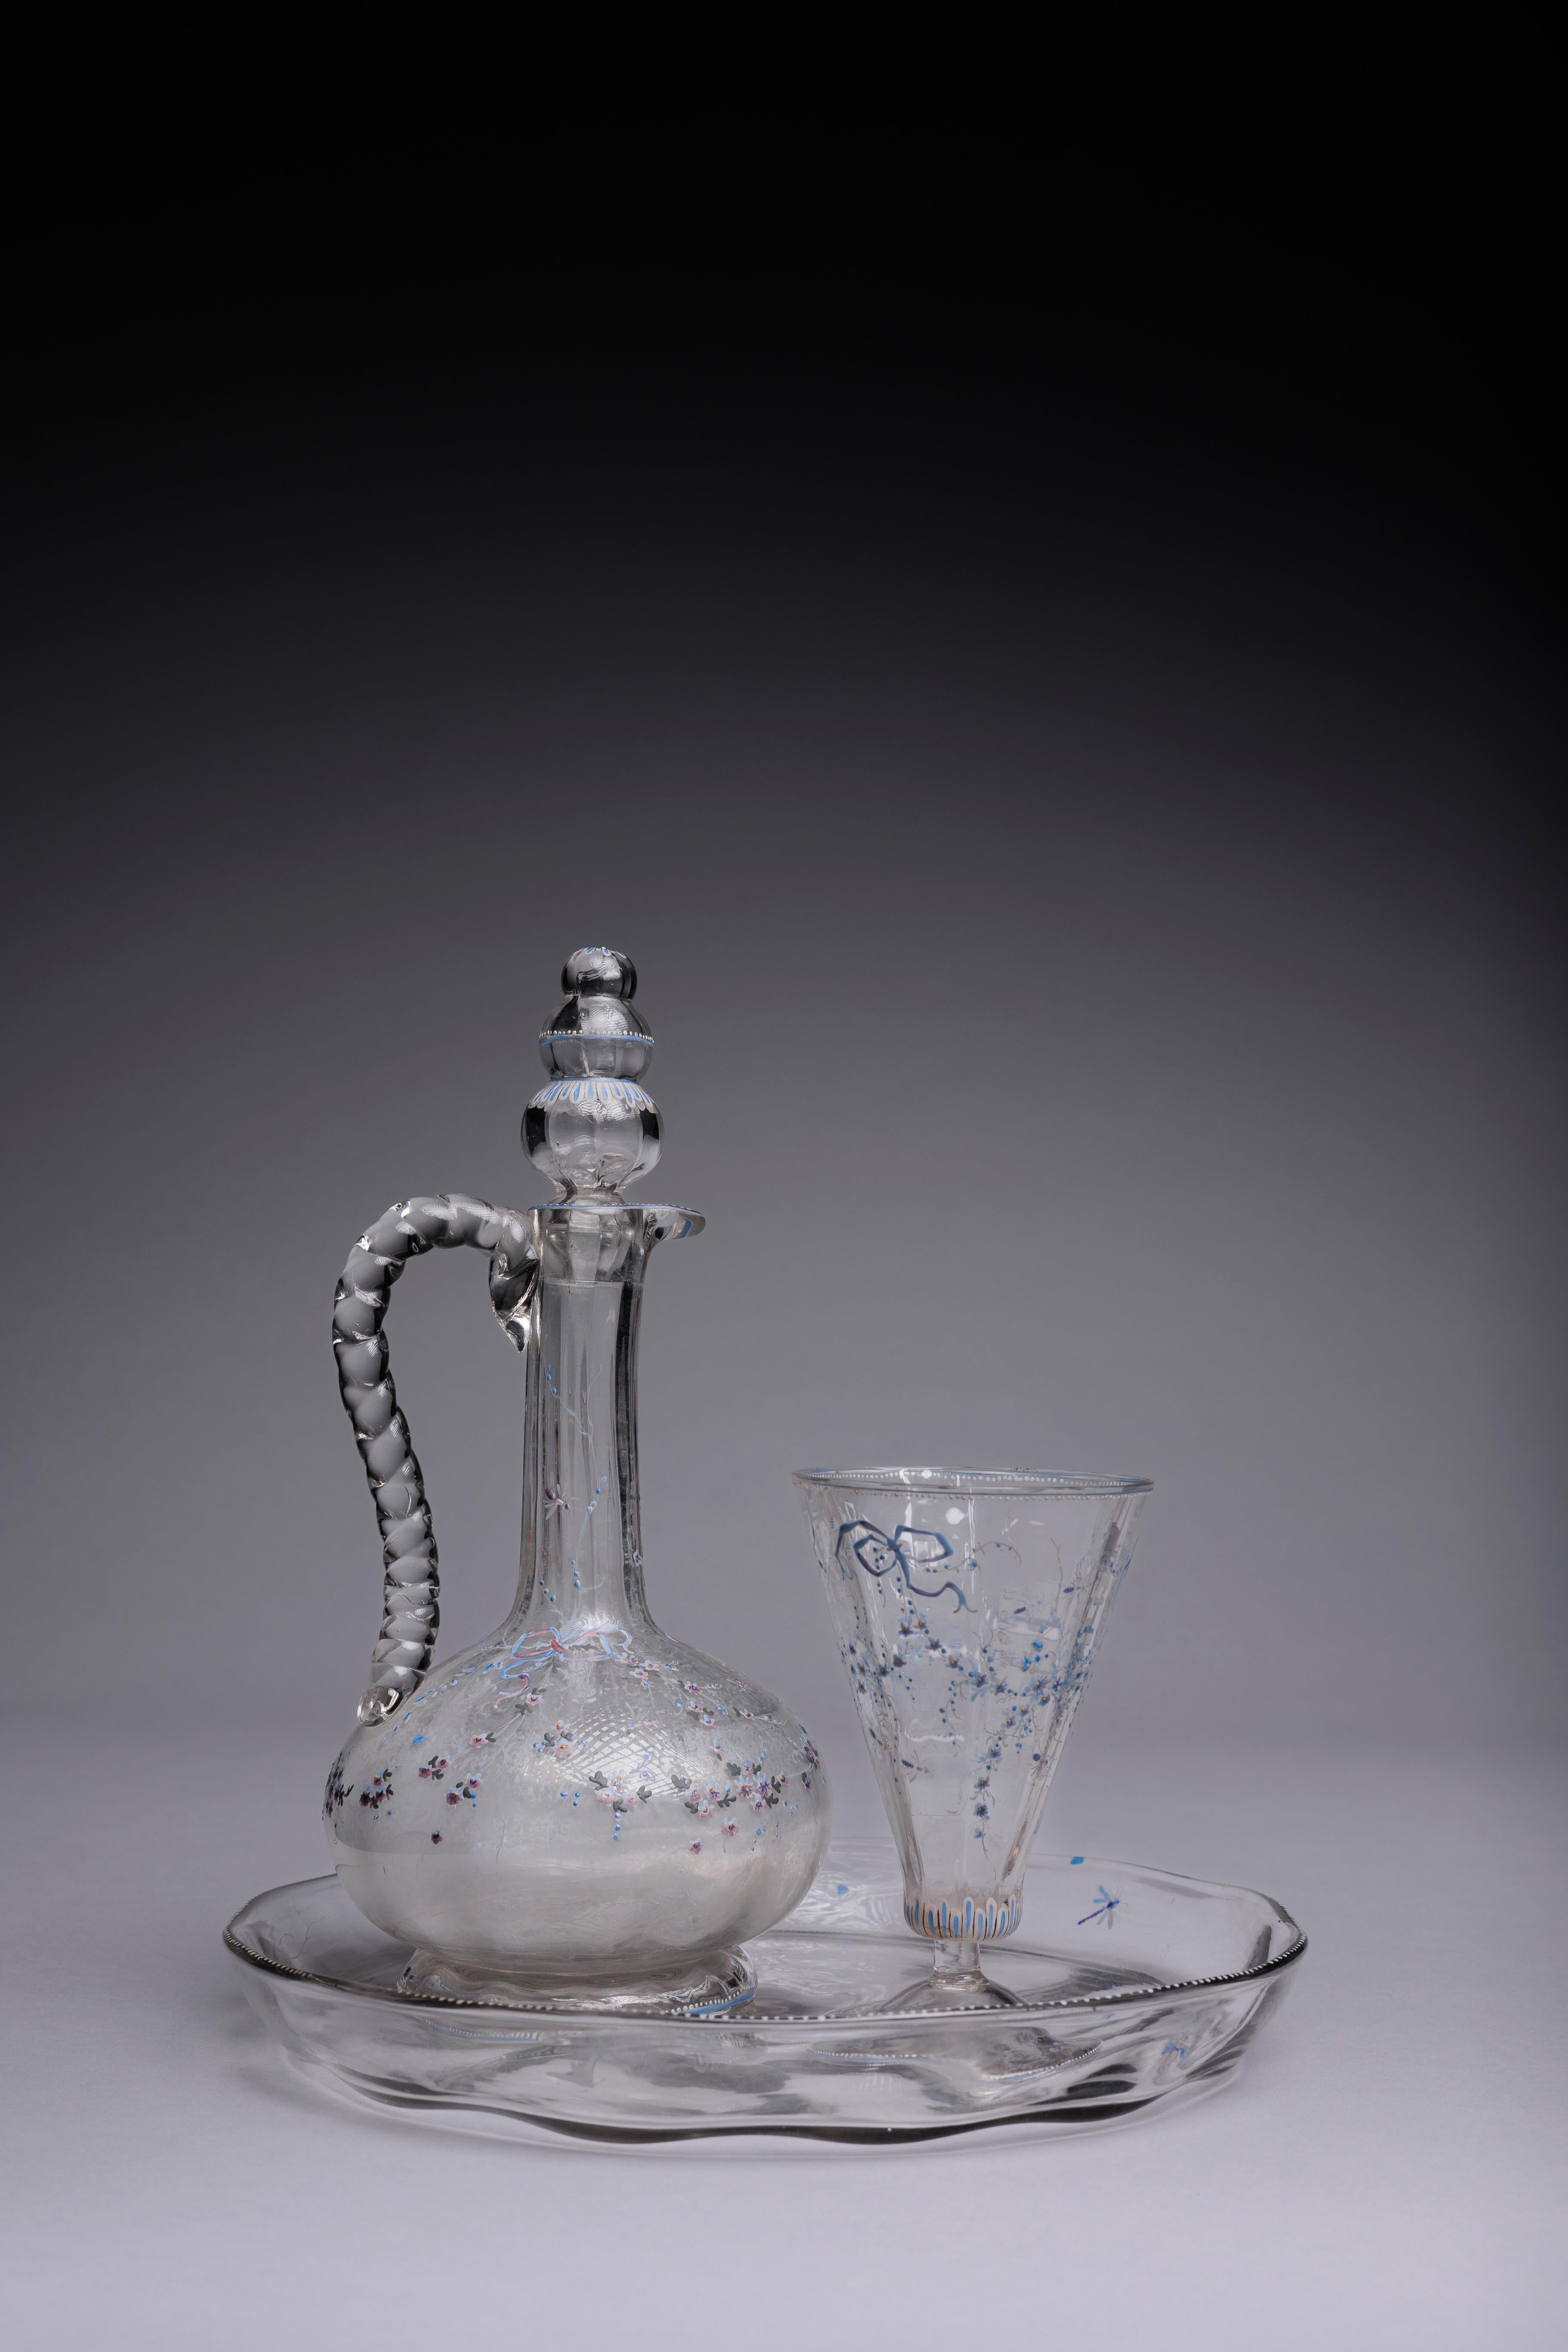 A beautifully delicate French glass decanter set made by Emile Galle in the late 19th century, decorated in enamels with ribbons and flowers in a lovely lavender and periwinkle palette.

This Galle glass set includes a carafe, a footed wine glass,